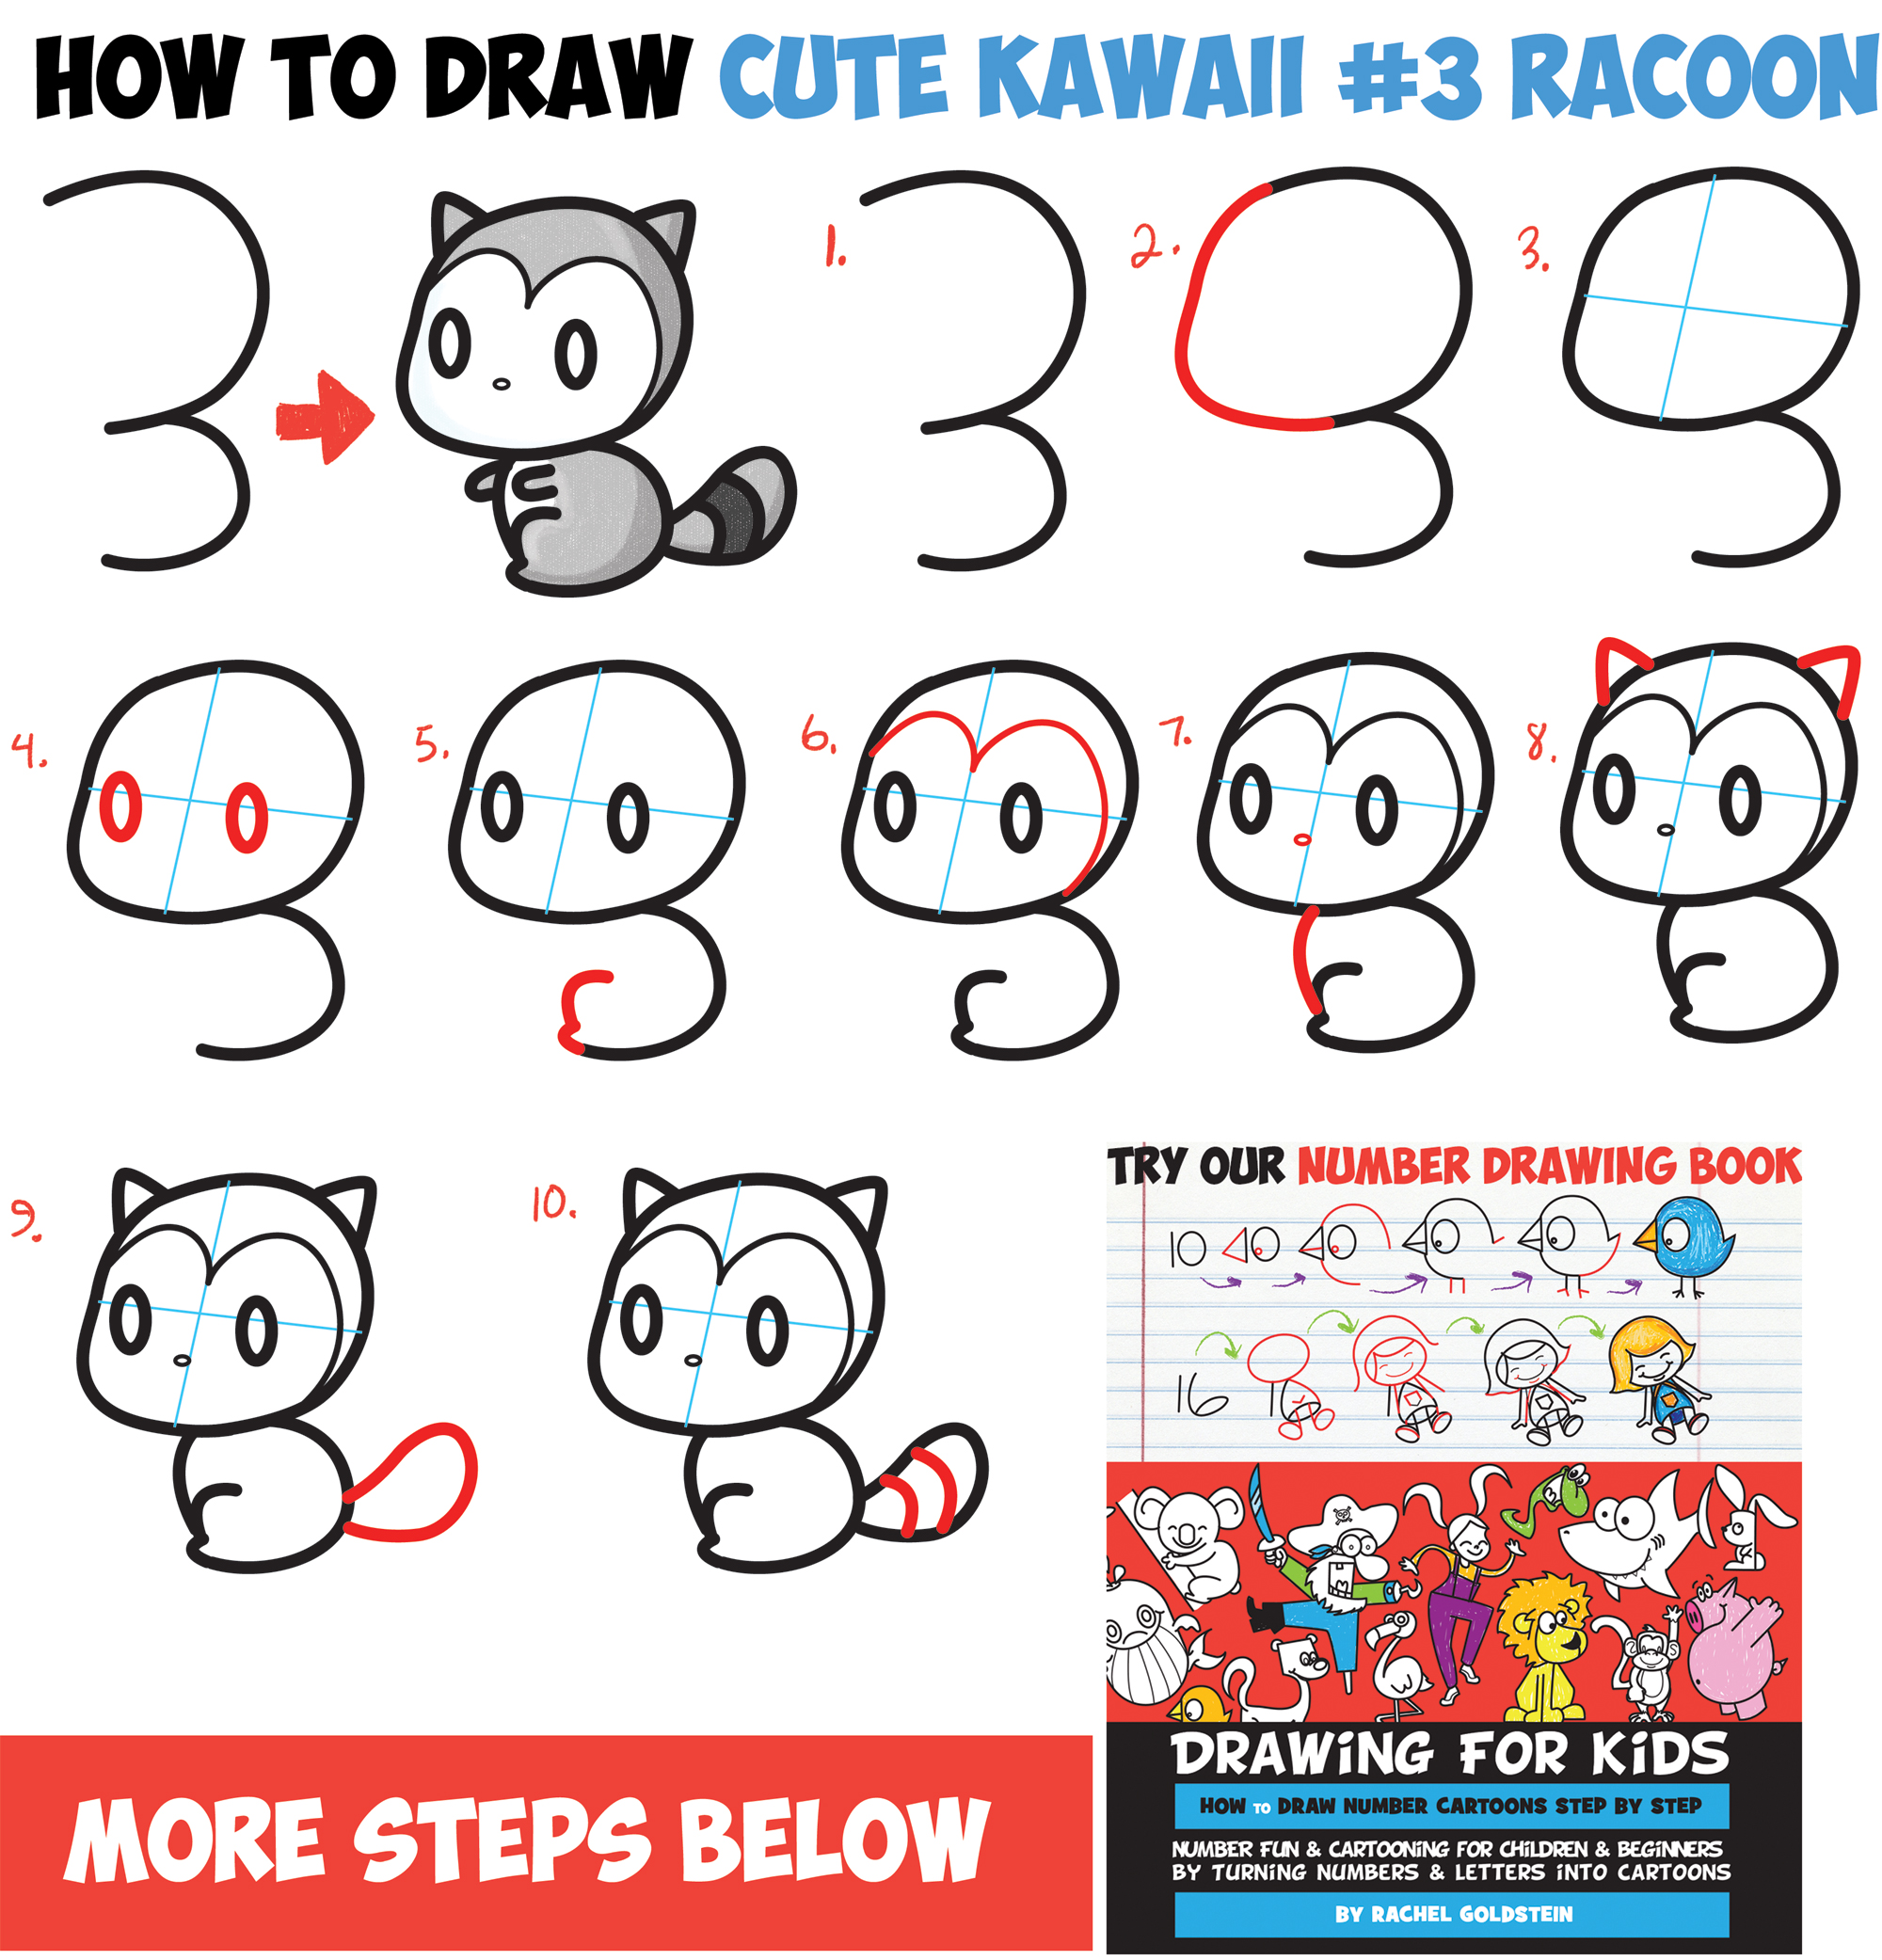 How To Draw Cute Kawaii Animals Step By Step In this step by step